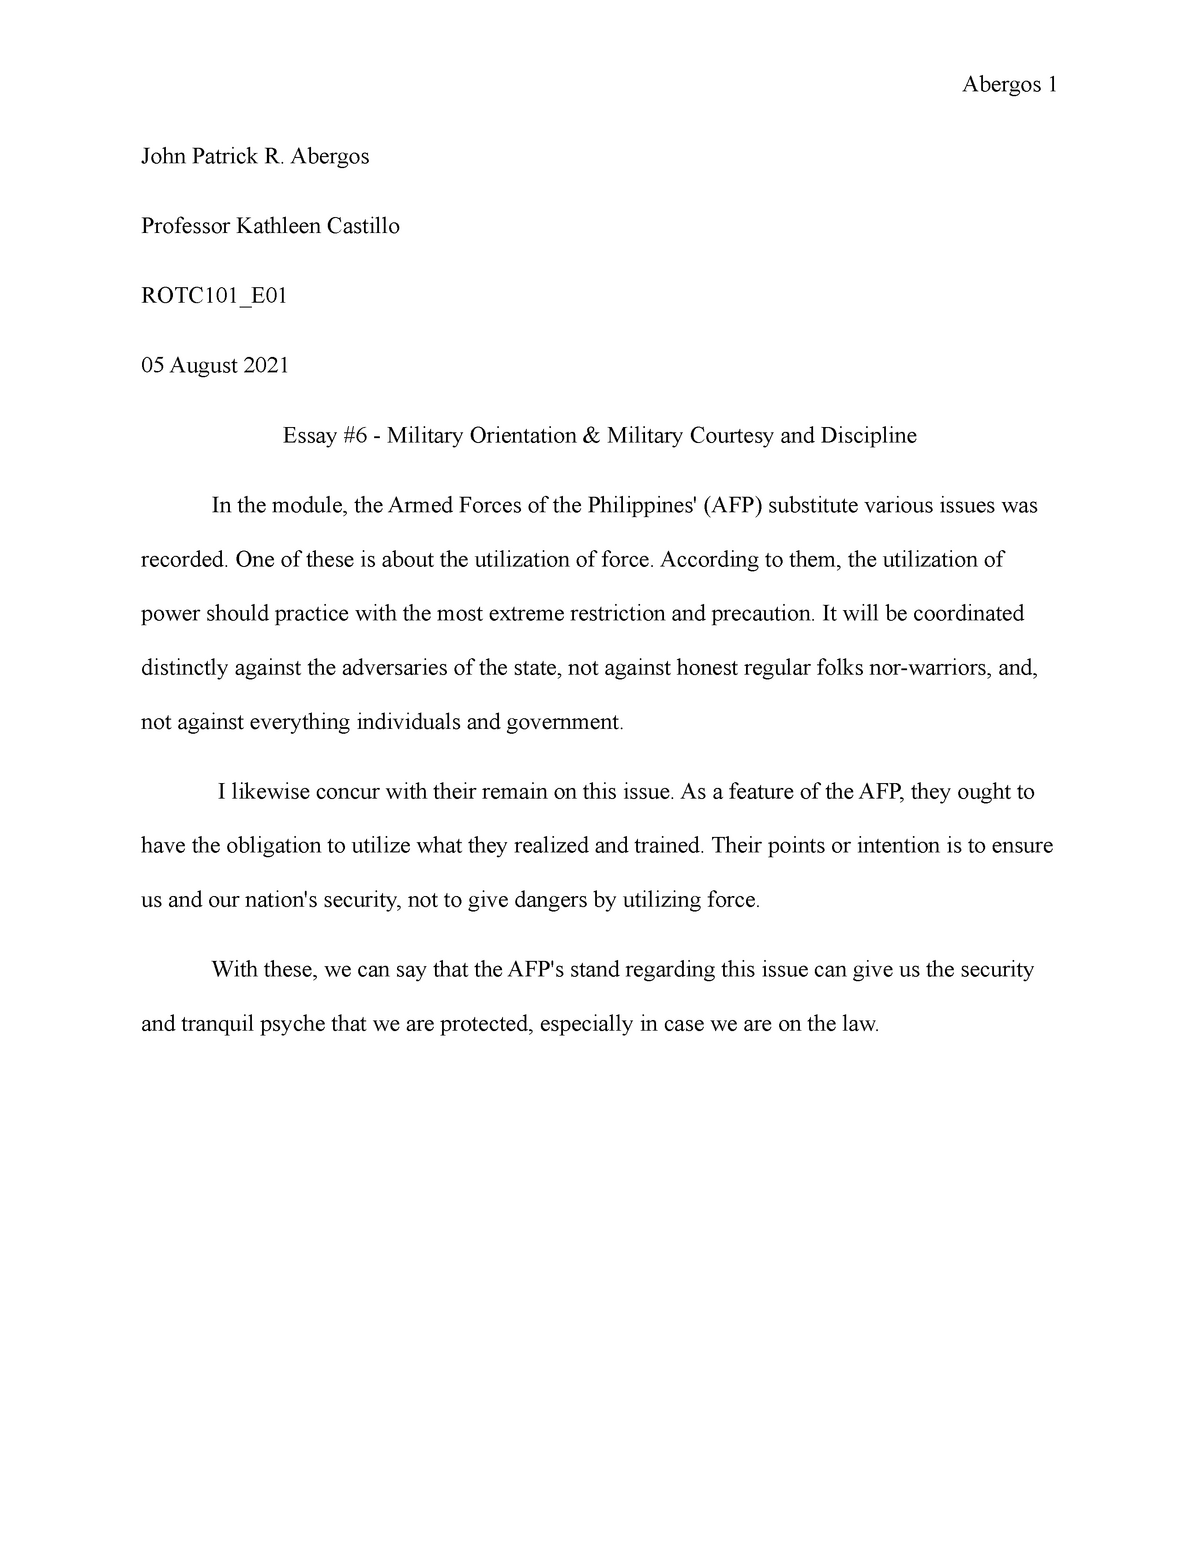 essay about military courtesy and discipline